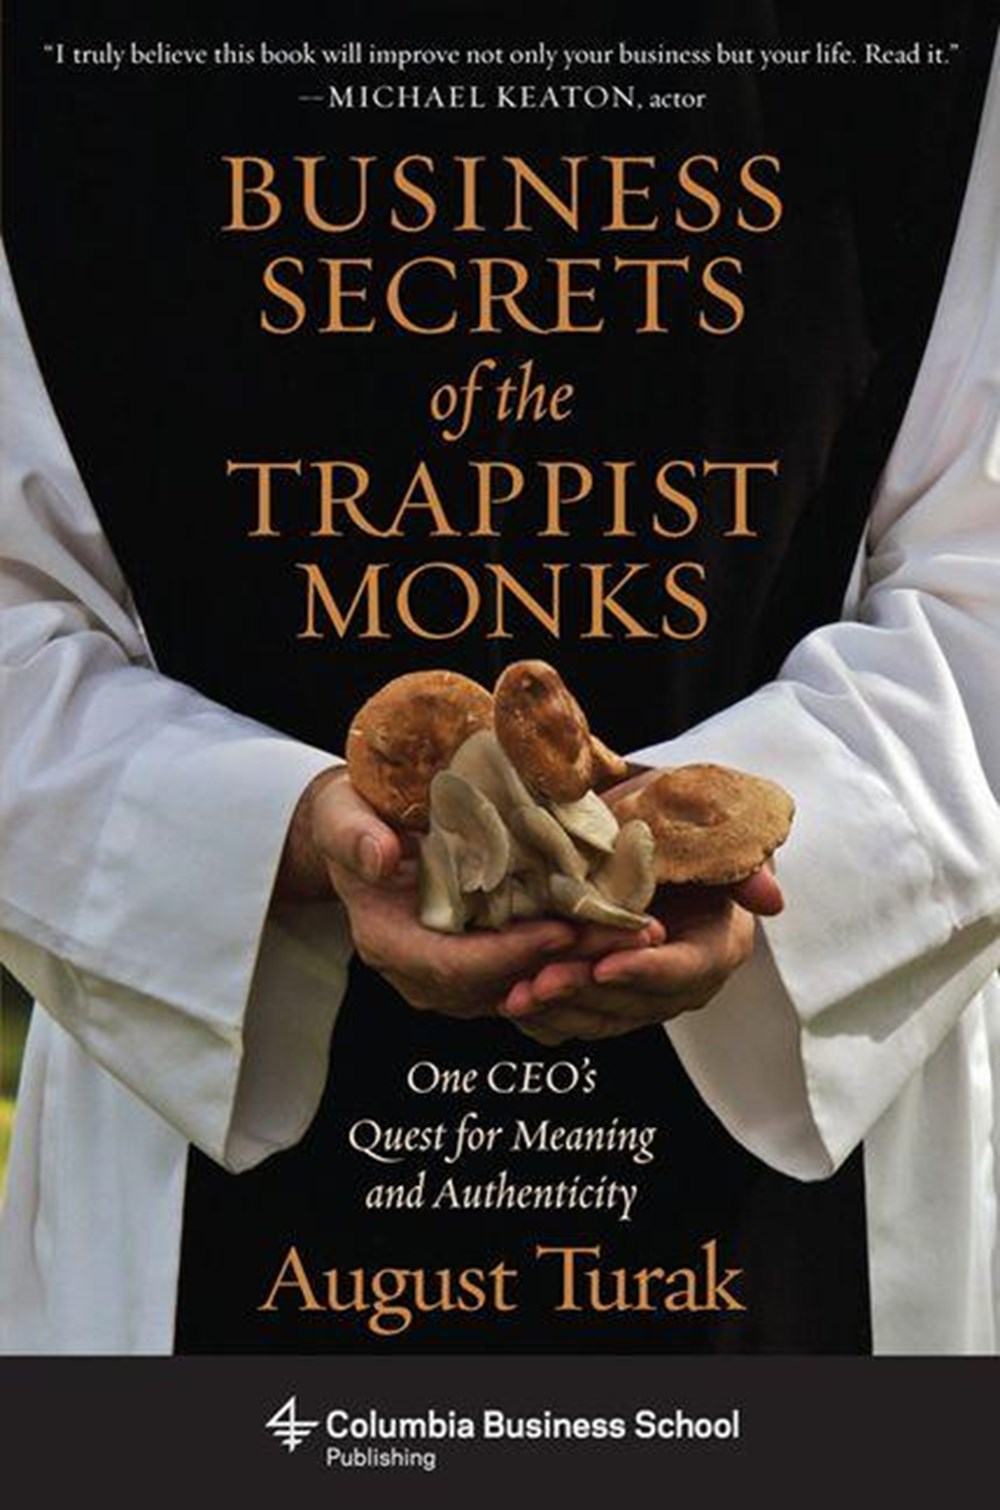 Business Secrets of the Trappist Monks One Ceo's Quest for Meaning and Authenticity